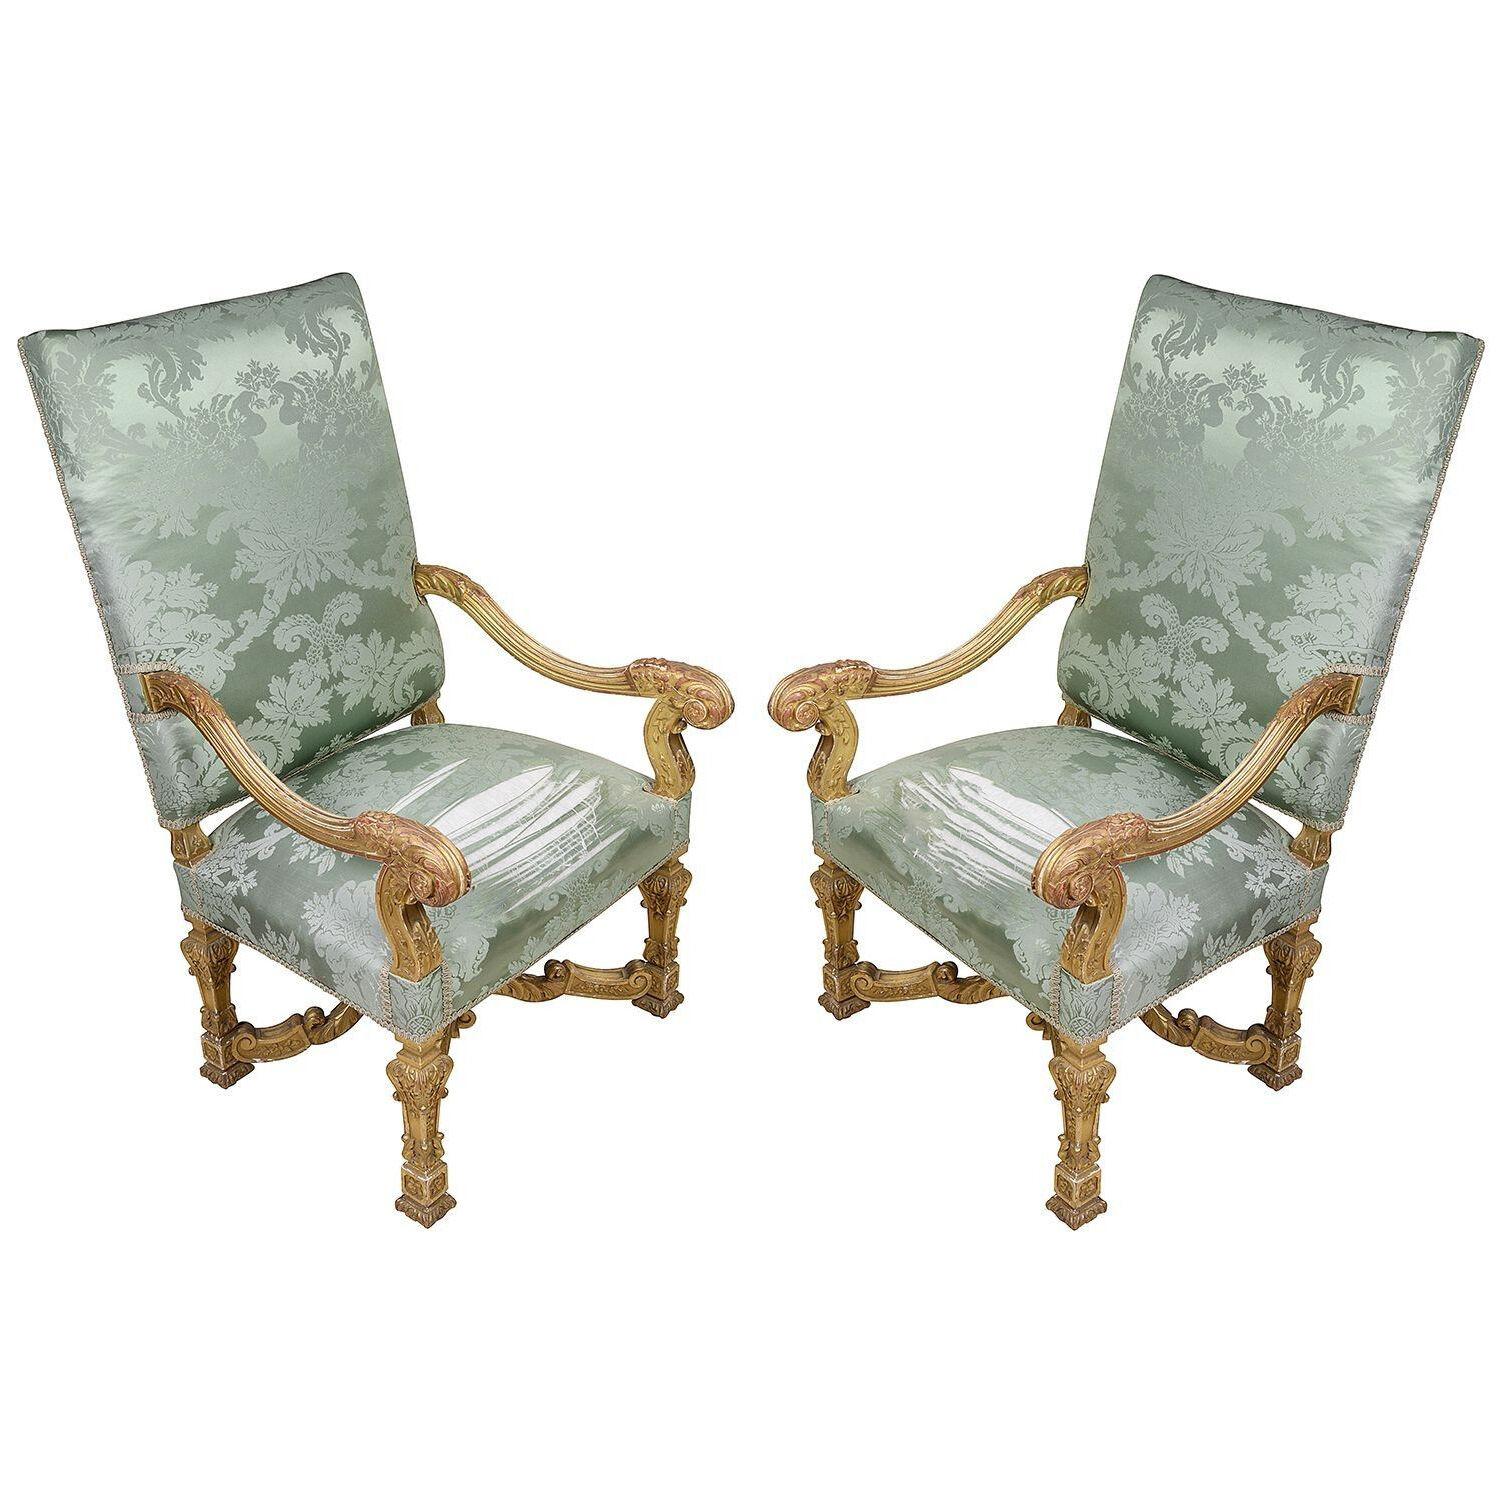 Fine quality William and Mary style giltwood arm chairs, C19th Century